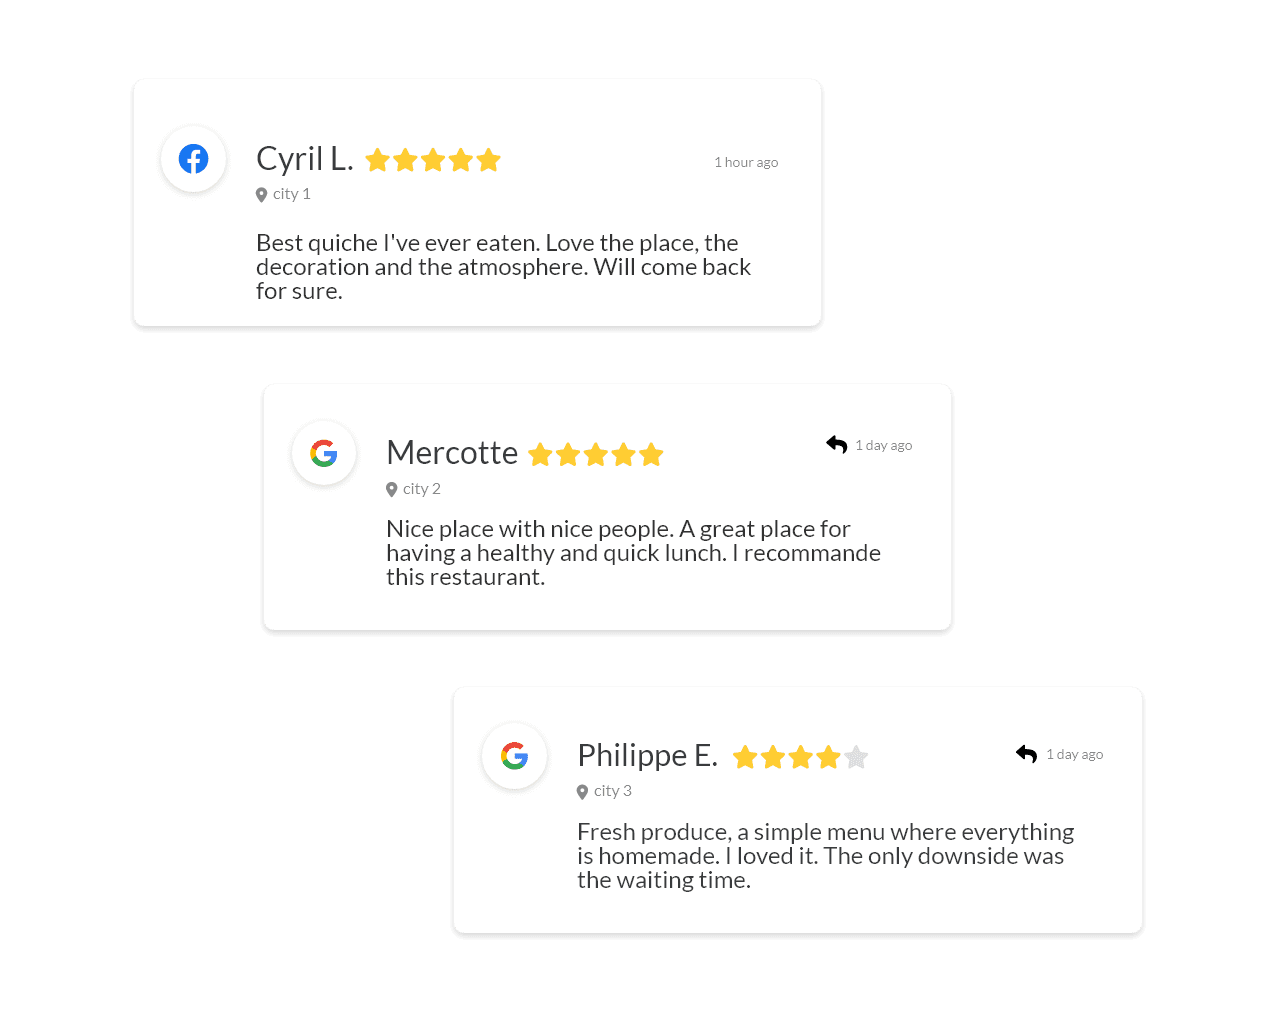 centralised monitoring of customer reviews